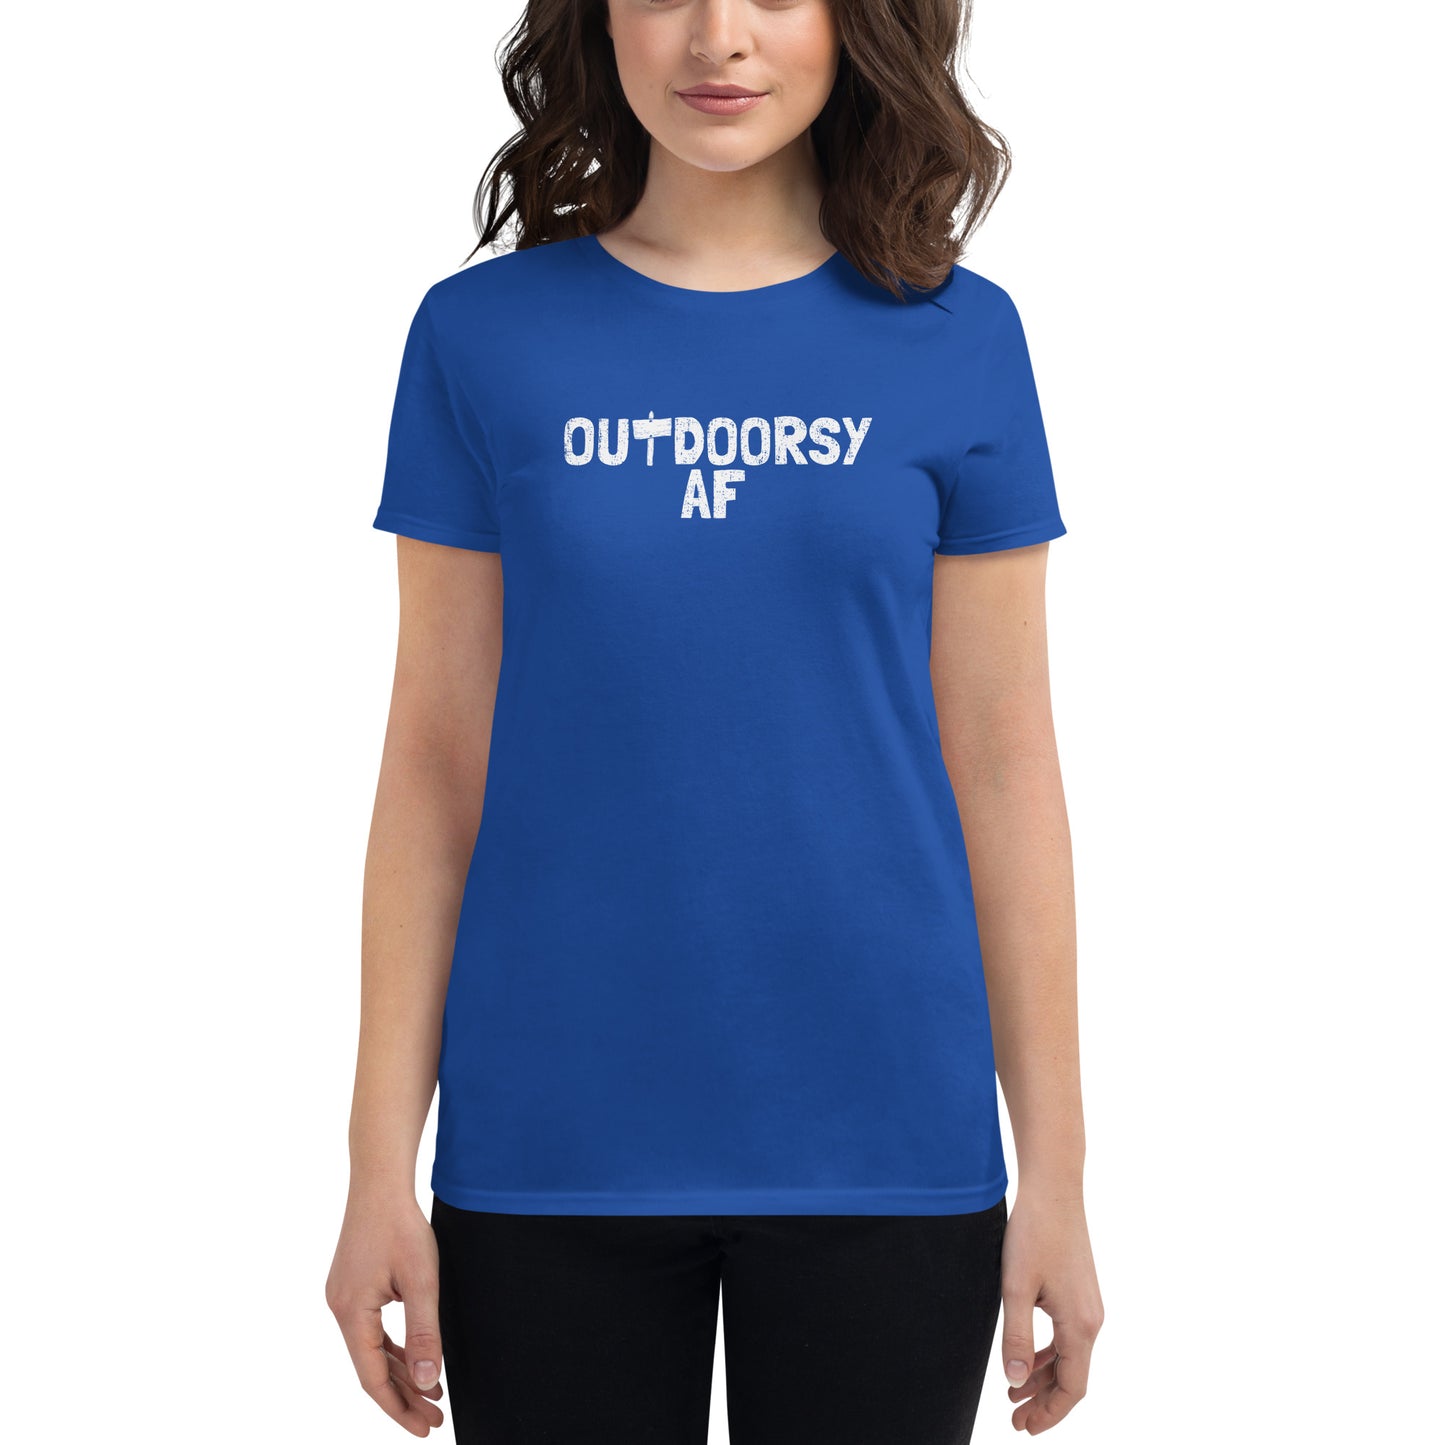 Women's Fashion Fit T-shirt - Outdoorsy AF